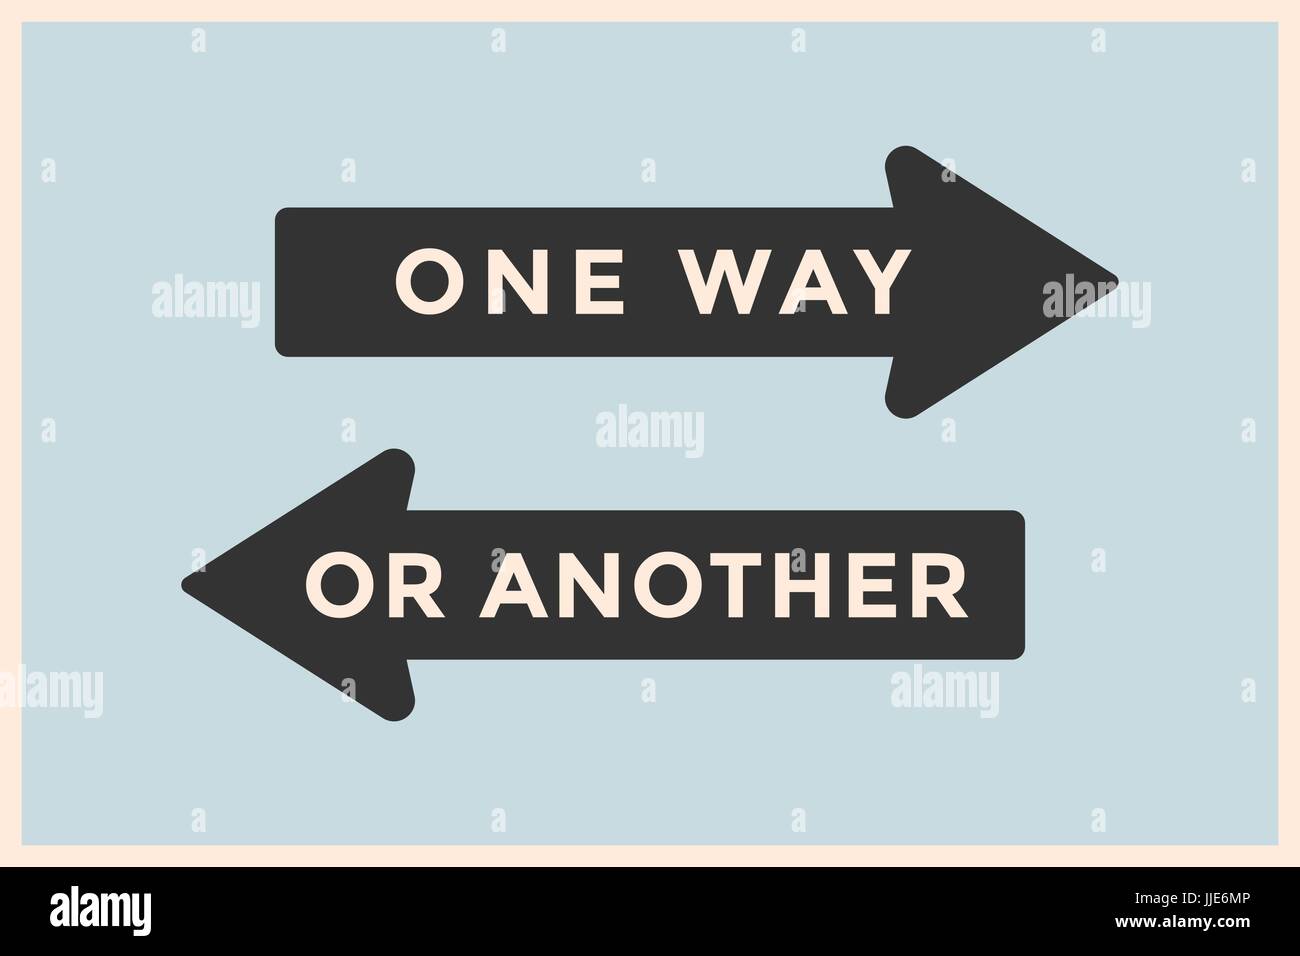 This another way. One way. One way or another. Указатель one way or another. One way or another таблички.